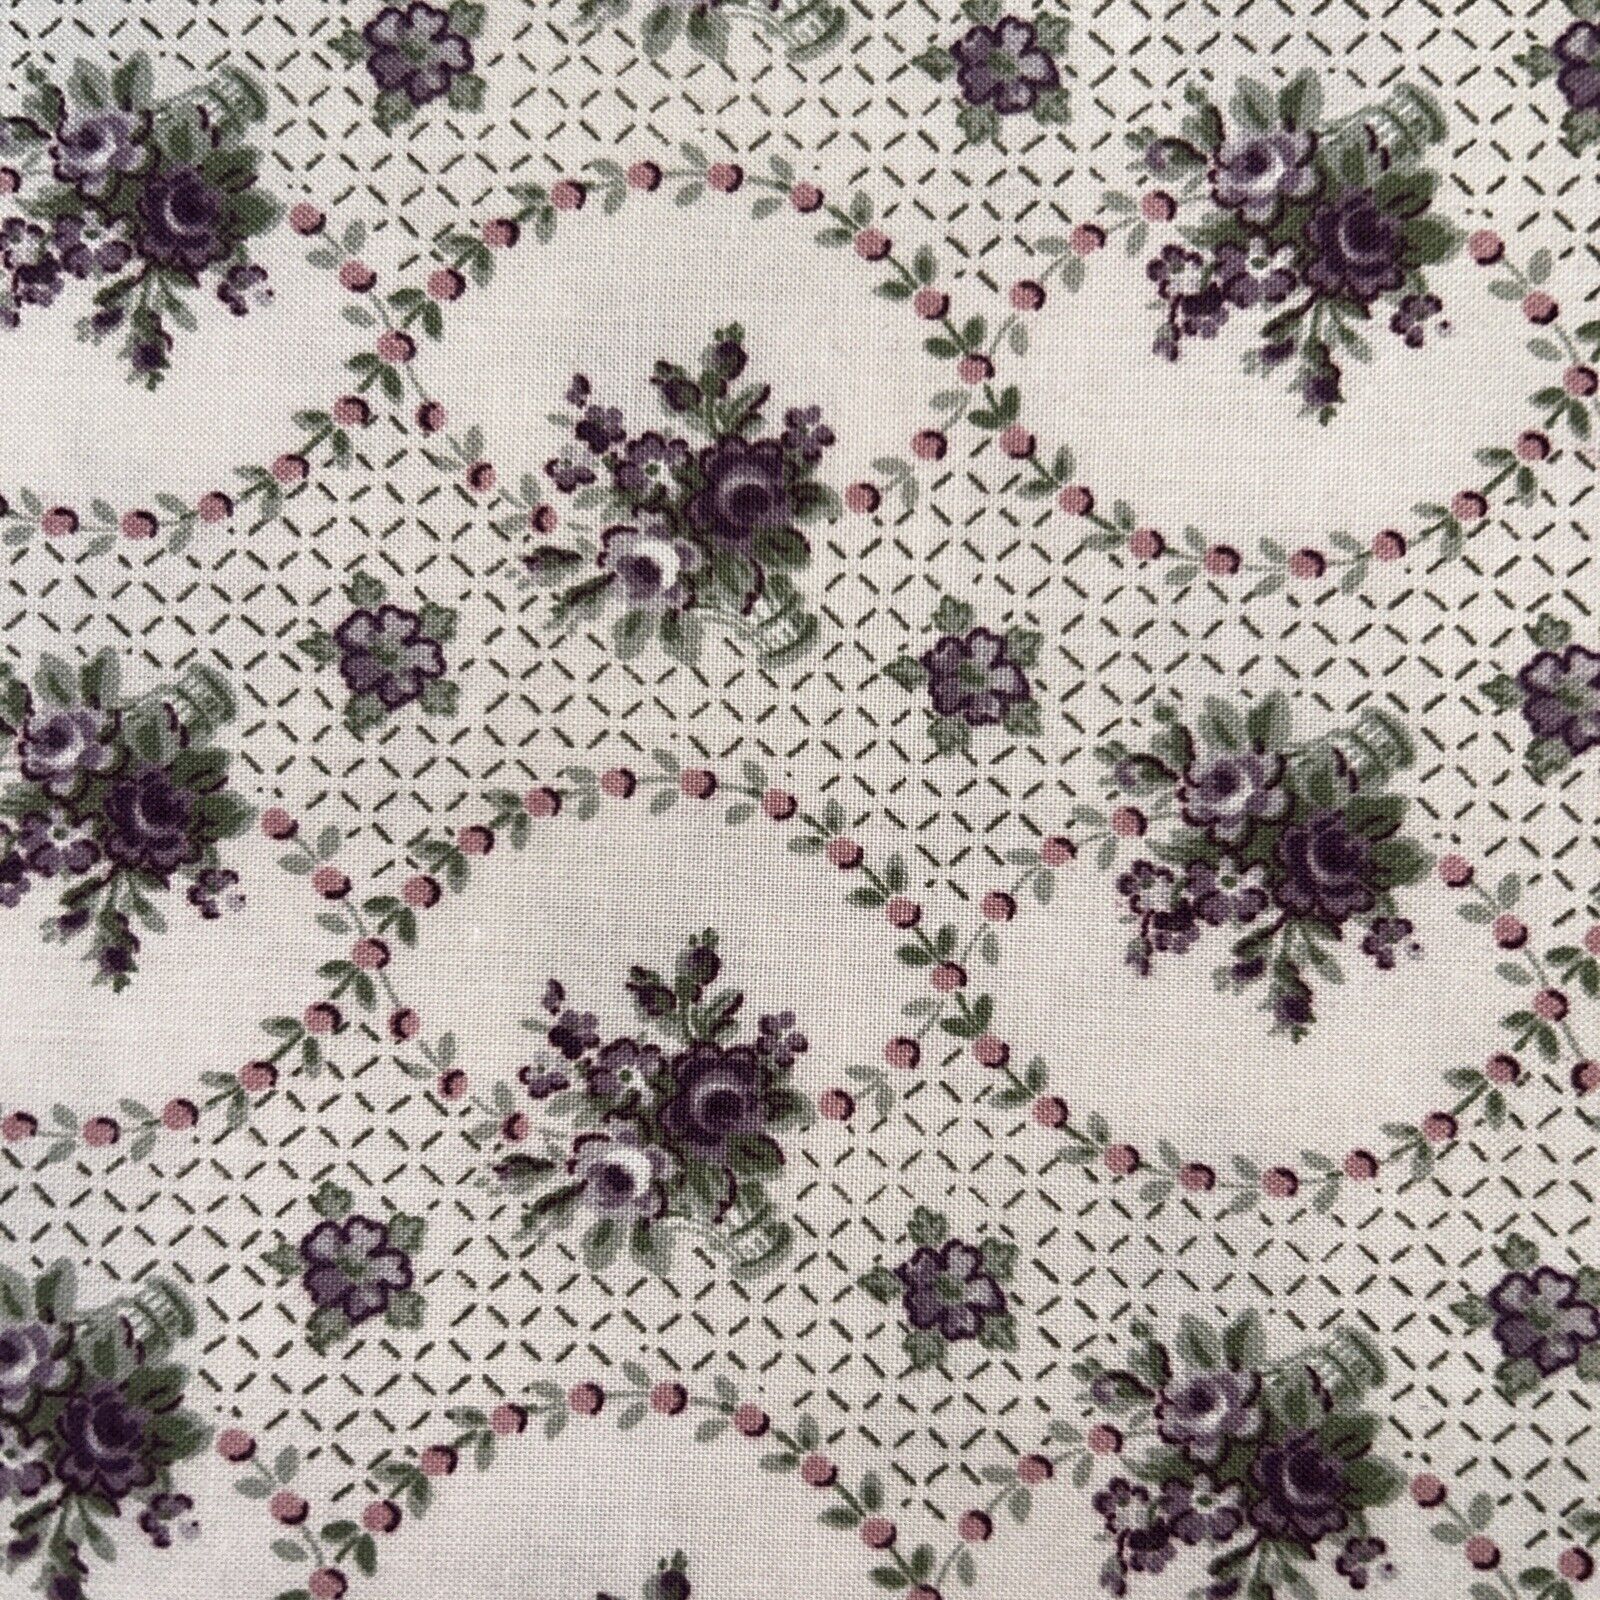 Vintage Laura Ashley Interiors Fabric ENGLISH COUNTRY Violet Floral 3 1/2 Yd